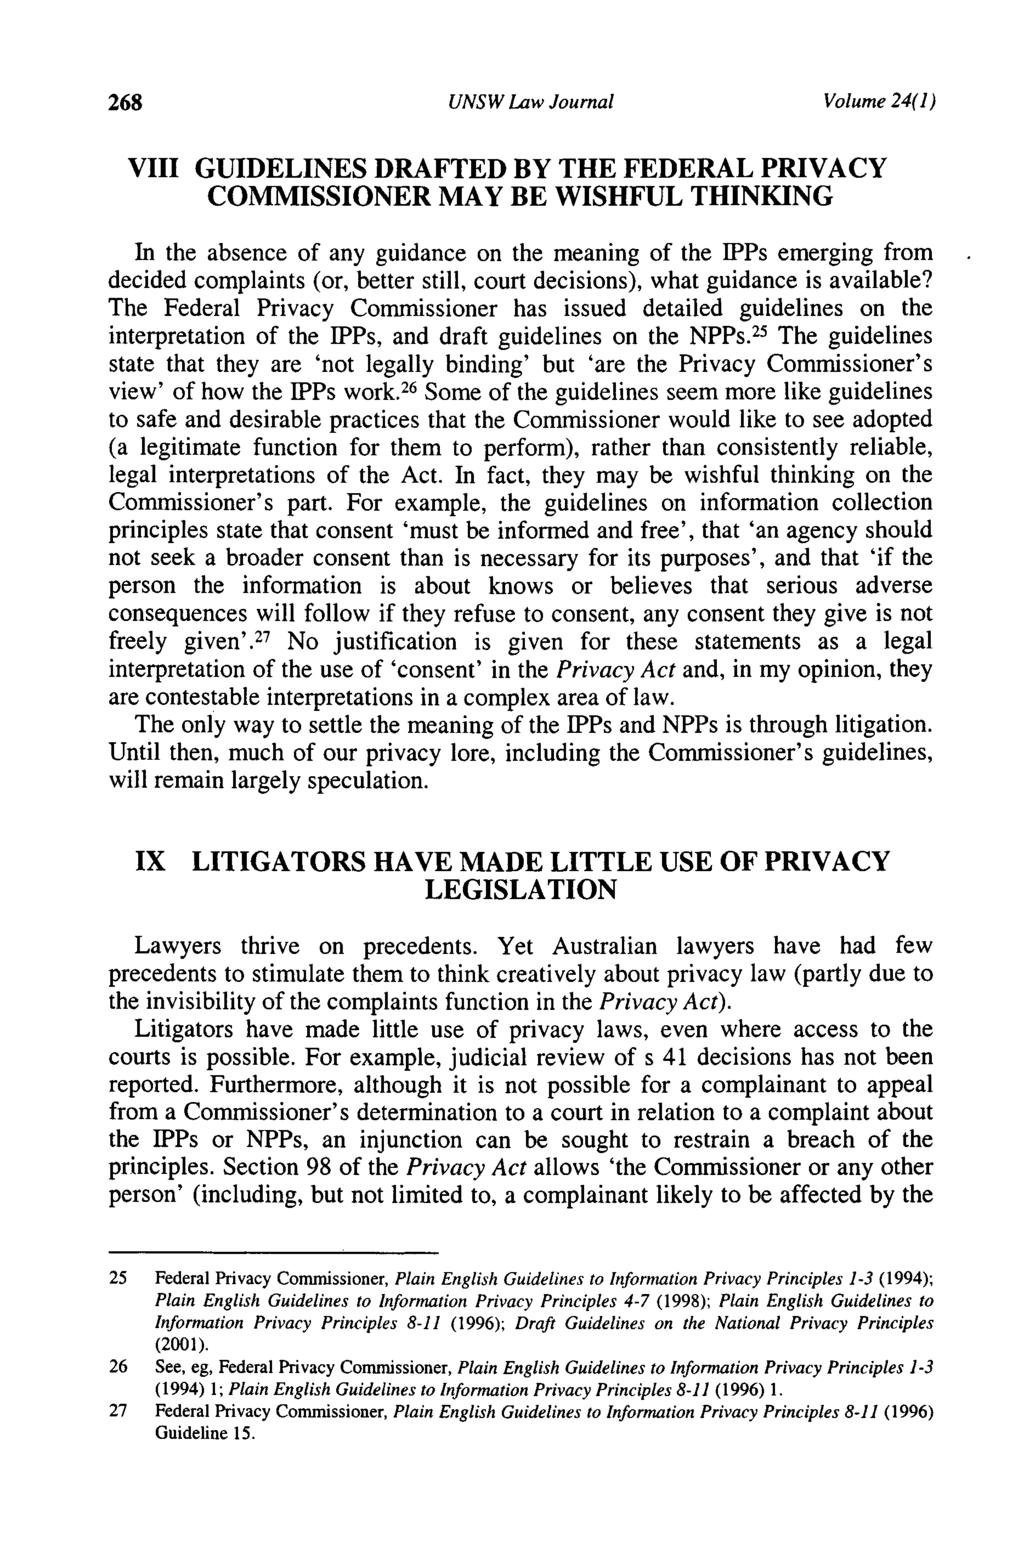 268 UNSW Law Journal Volume 24( 1) VIII GUIDELINES DRAFTED BY THE FEDERAL PRIVACY COMMISSIONER MAY BE WISHFUL THINKING In the absence of any guidance on the meaning of the IPPs emerging from decided